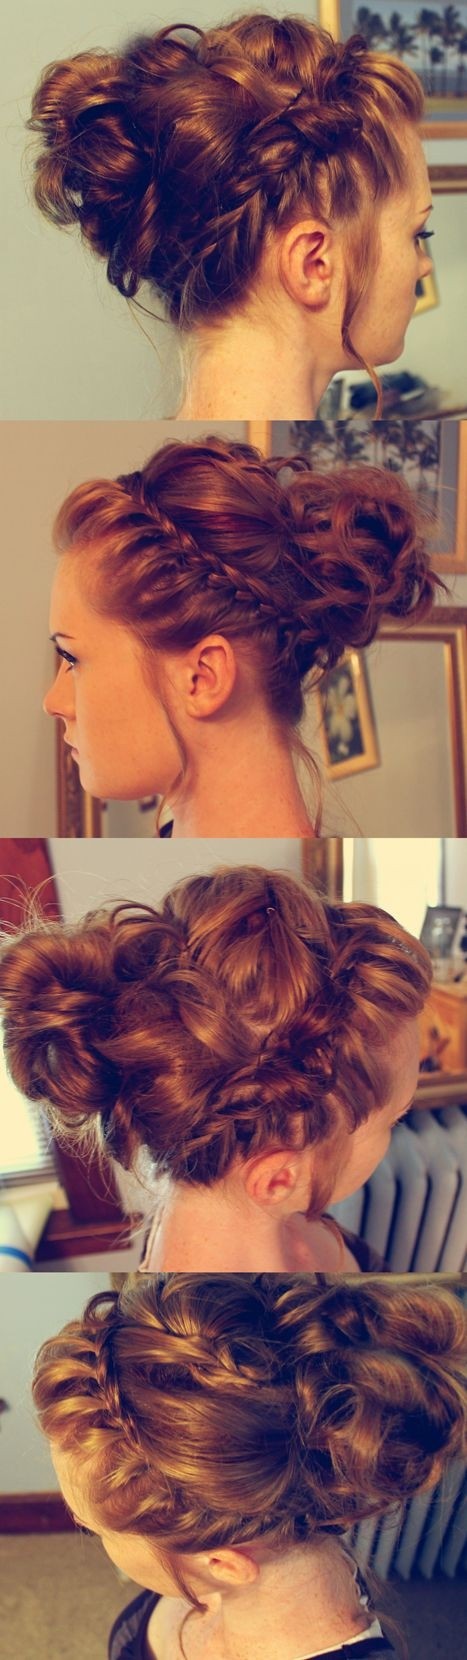 Braided Messy Bun Updo - 2015 Trendy Prom Hairstyles for Long Hair